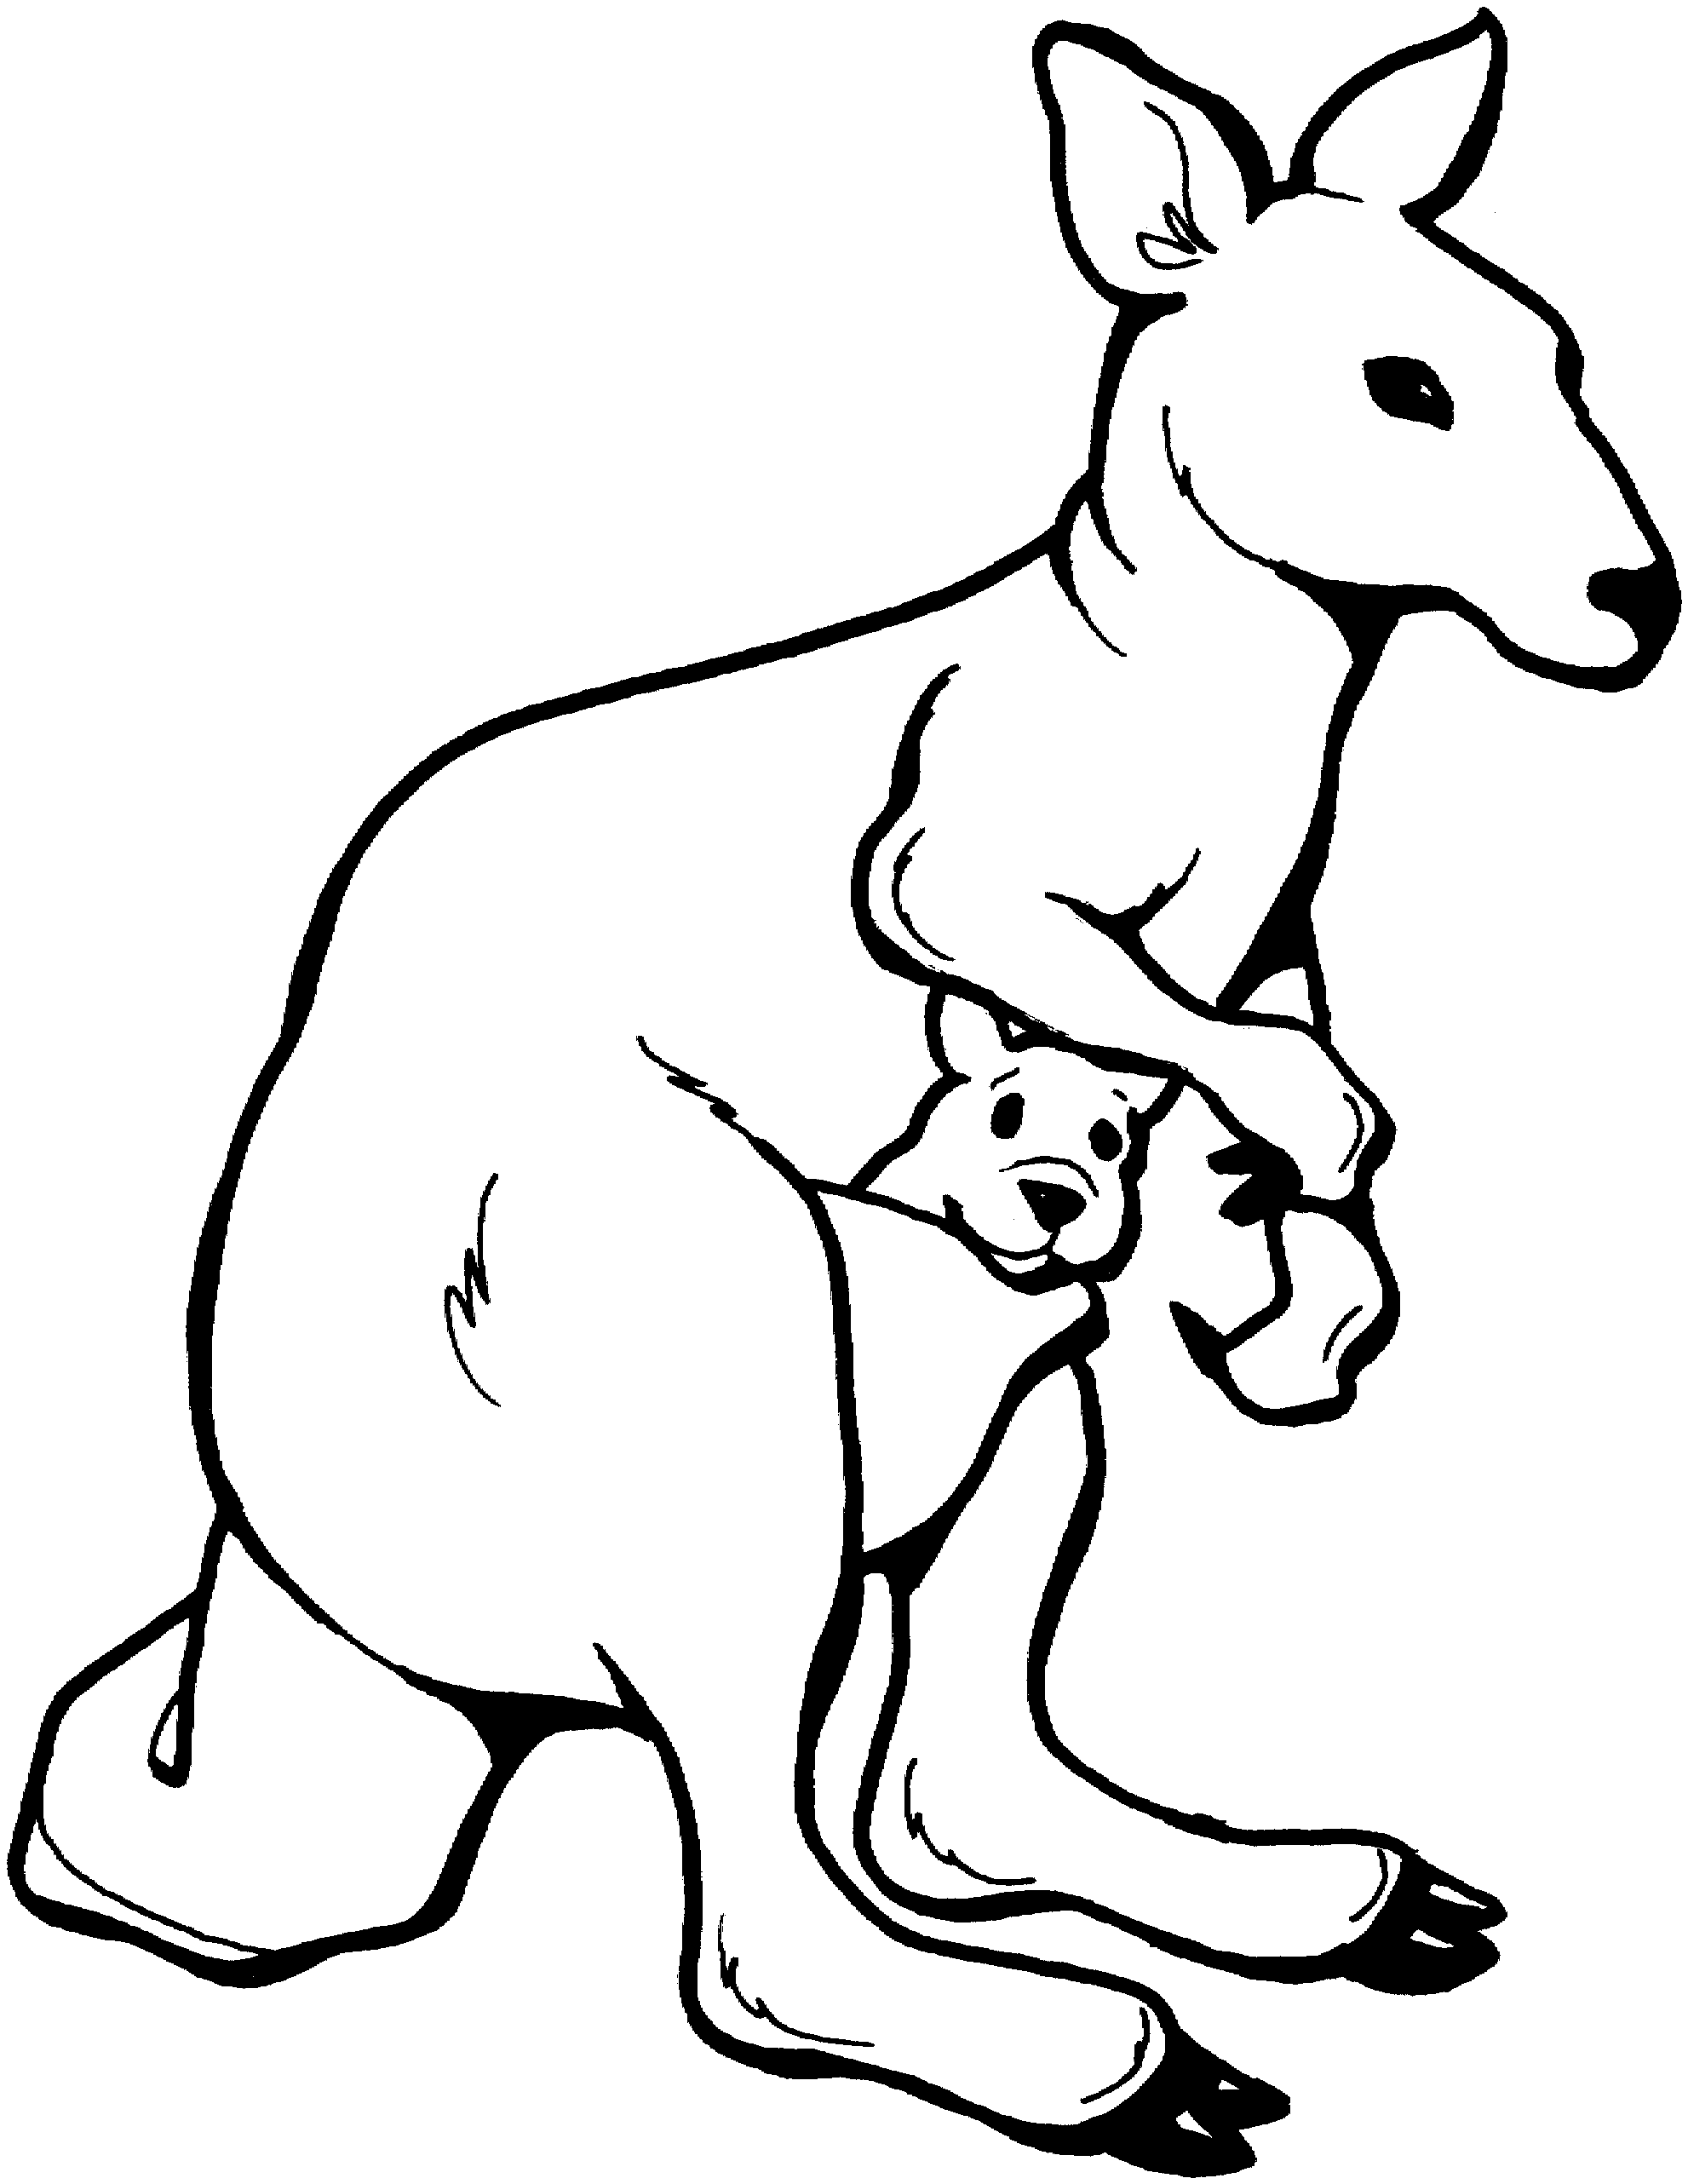 Kangaroo Black And White Images 2 Wikiclipart Clipart